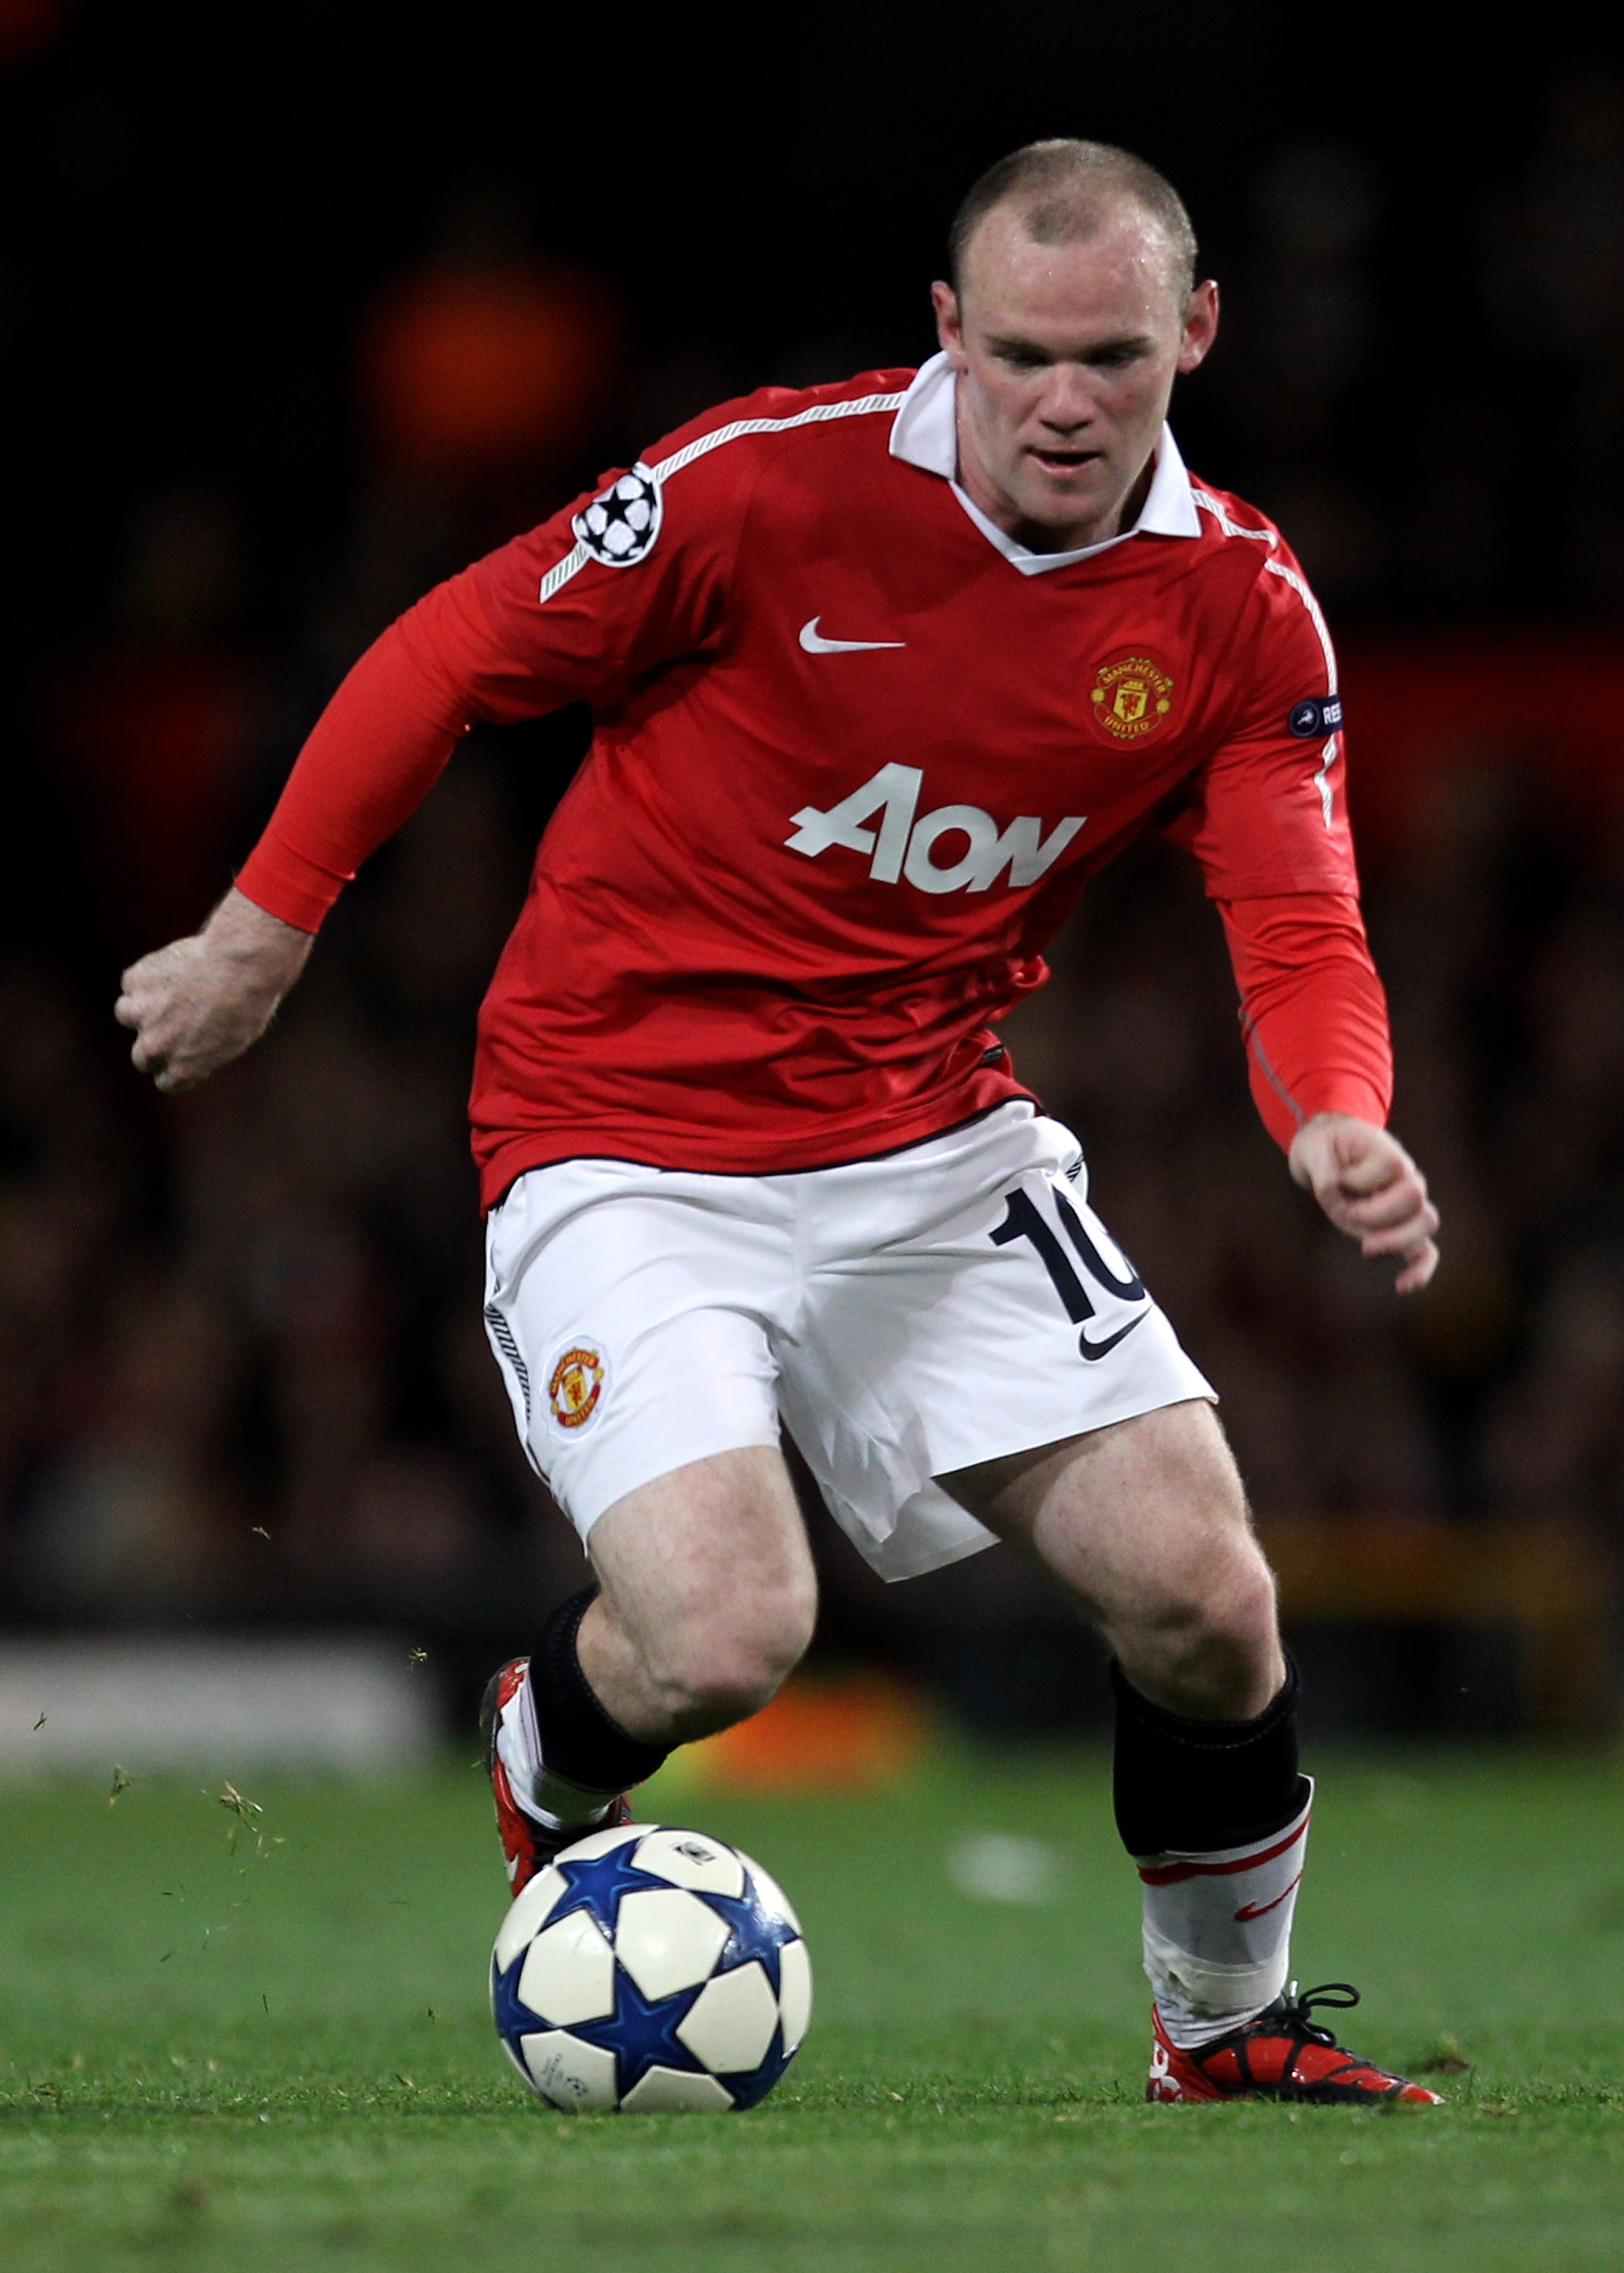 MANCHESTER, ENGLAND - SEPTEMBER 14:  Wayne Rooney of Manchester United in action during the UEFA Champions League Group C match between Manchester United and Rangers at Old Trafford on September 14, 2010 in Manchester, England.  (Photo by Alex Livesey/Get